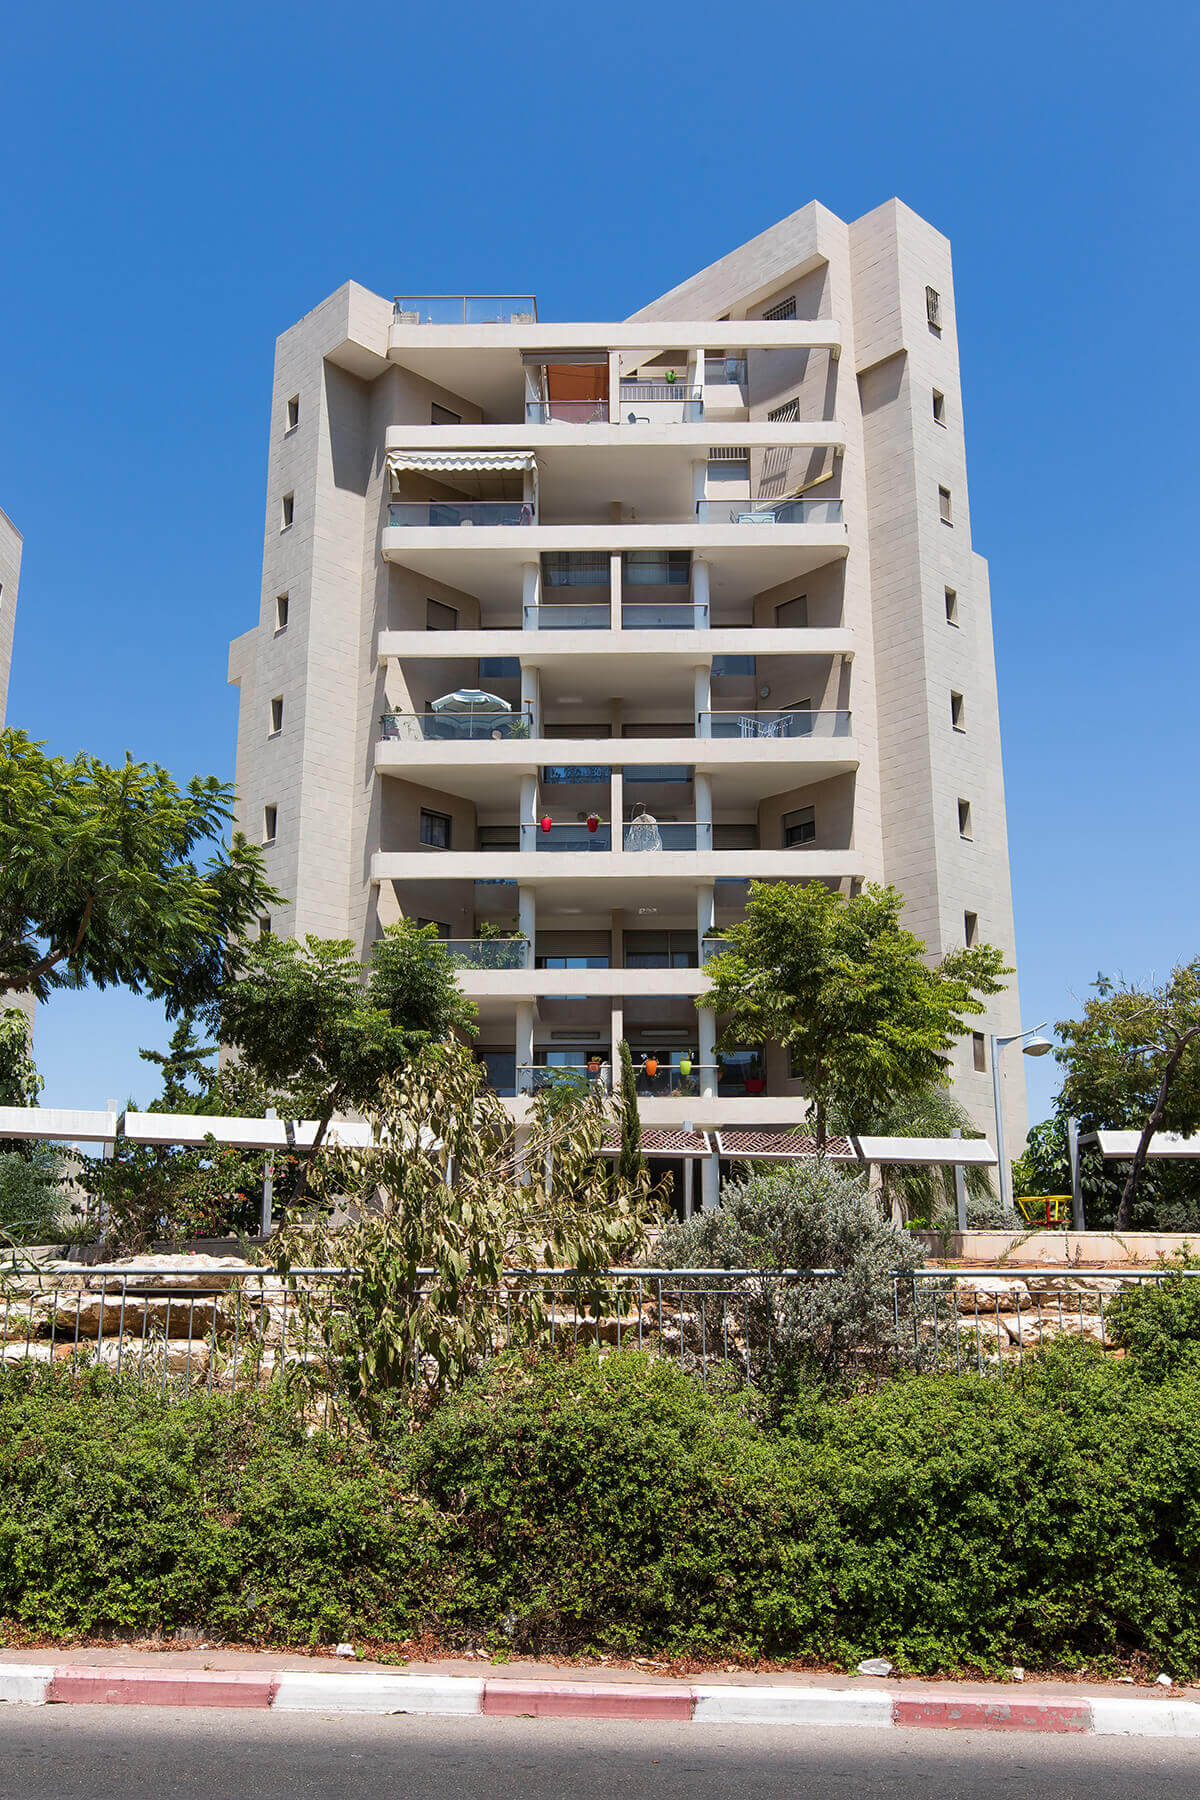 Photograph of a building from the Central Park project in Holon